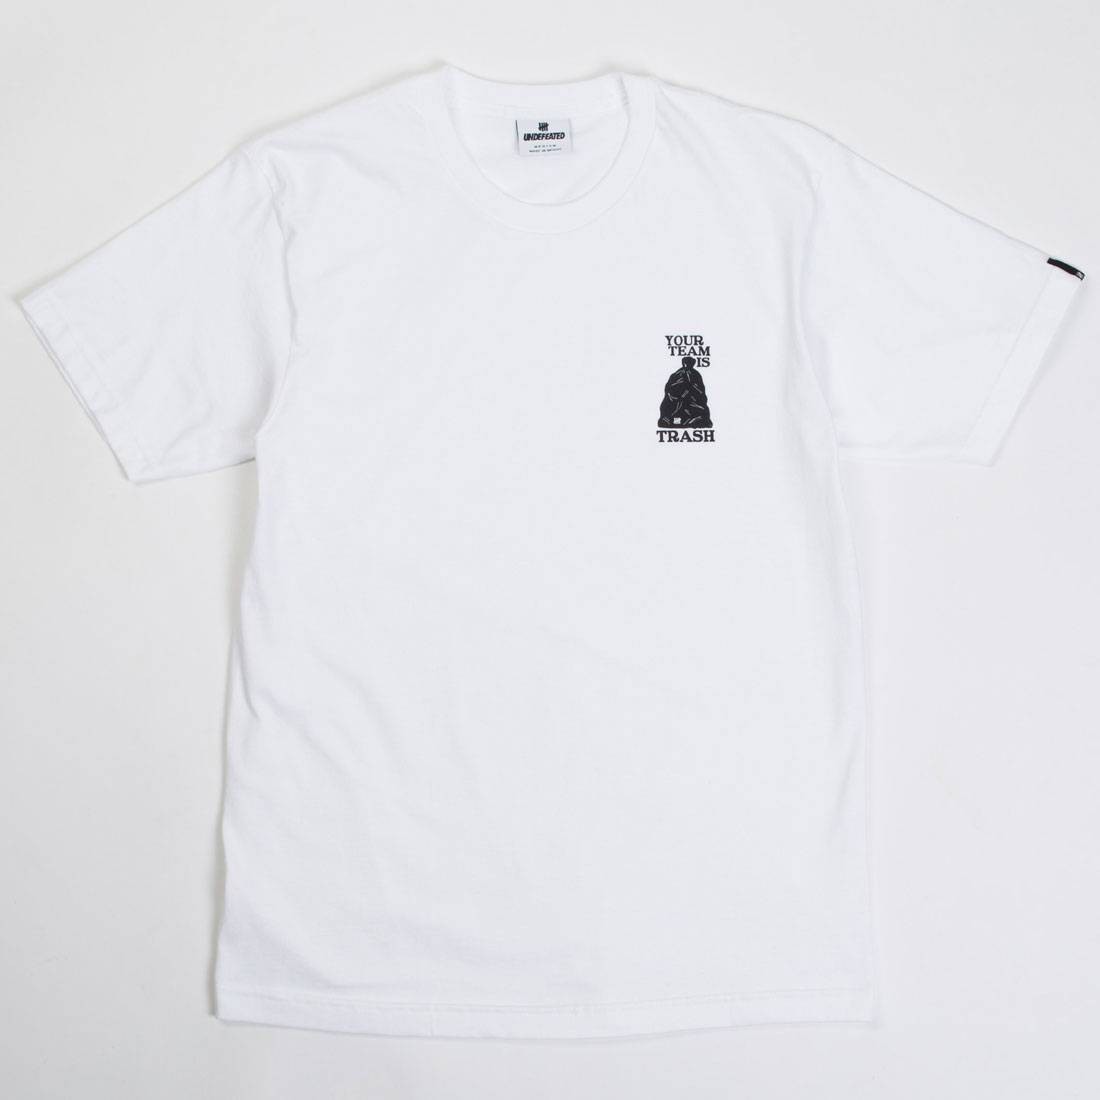 Undefeated Men Team Is Trash Tee white